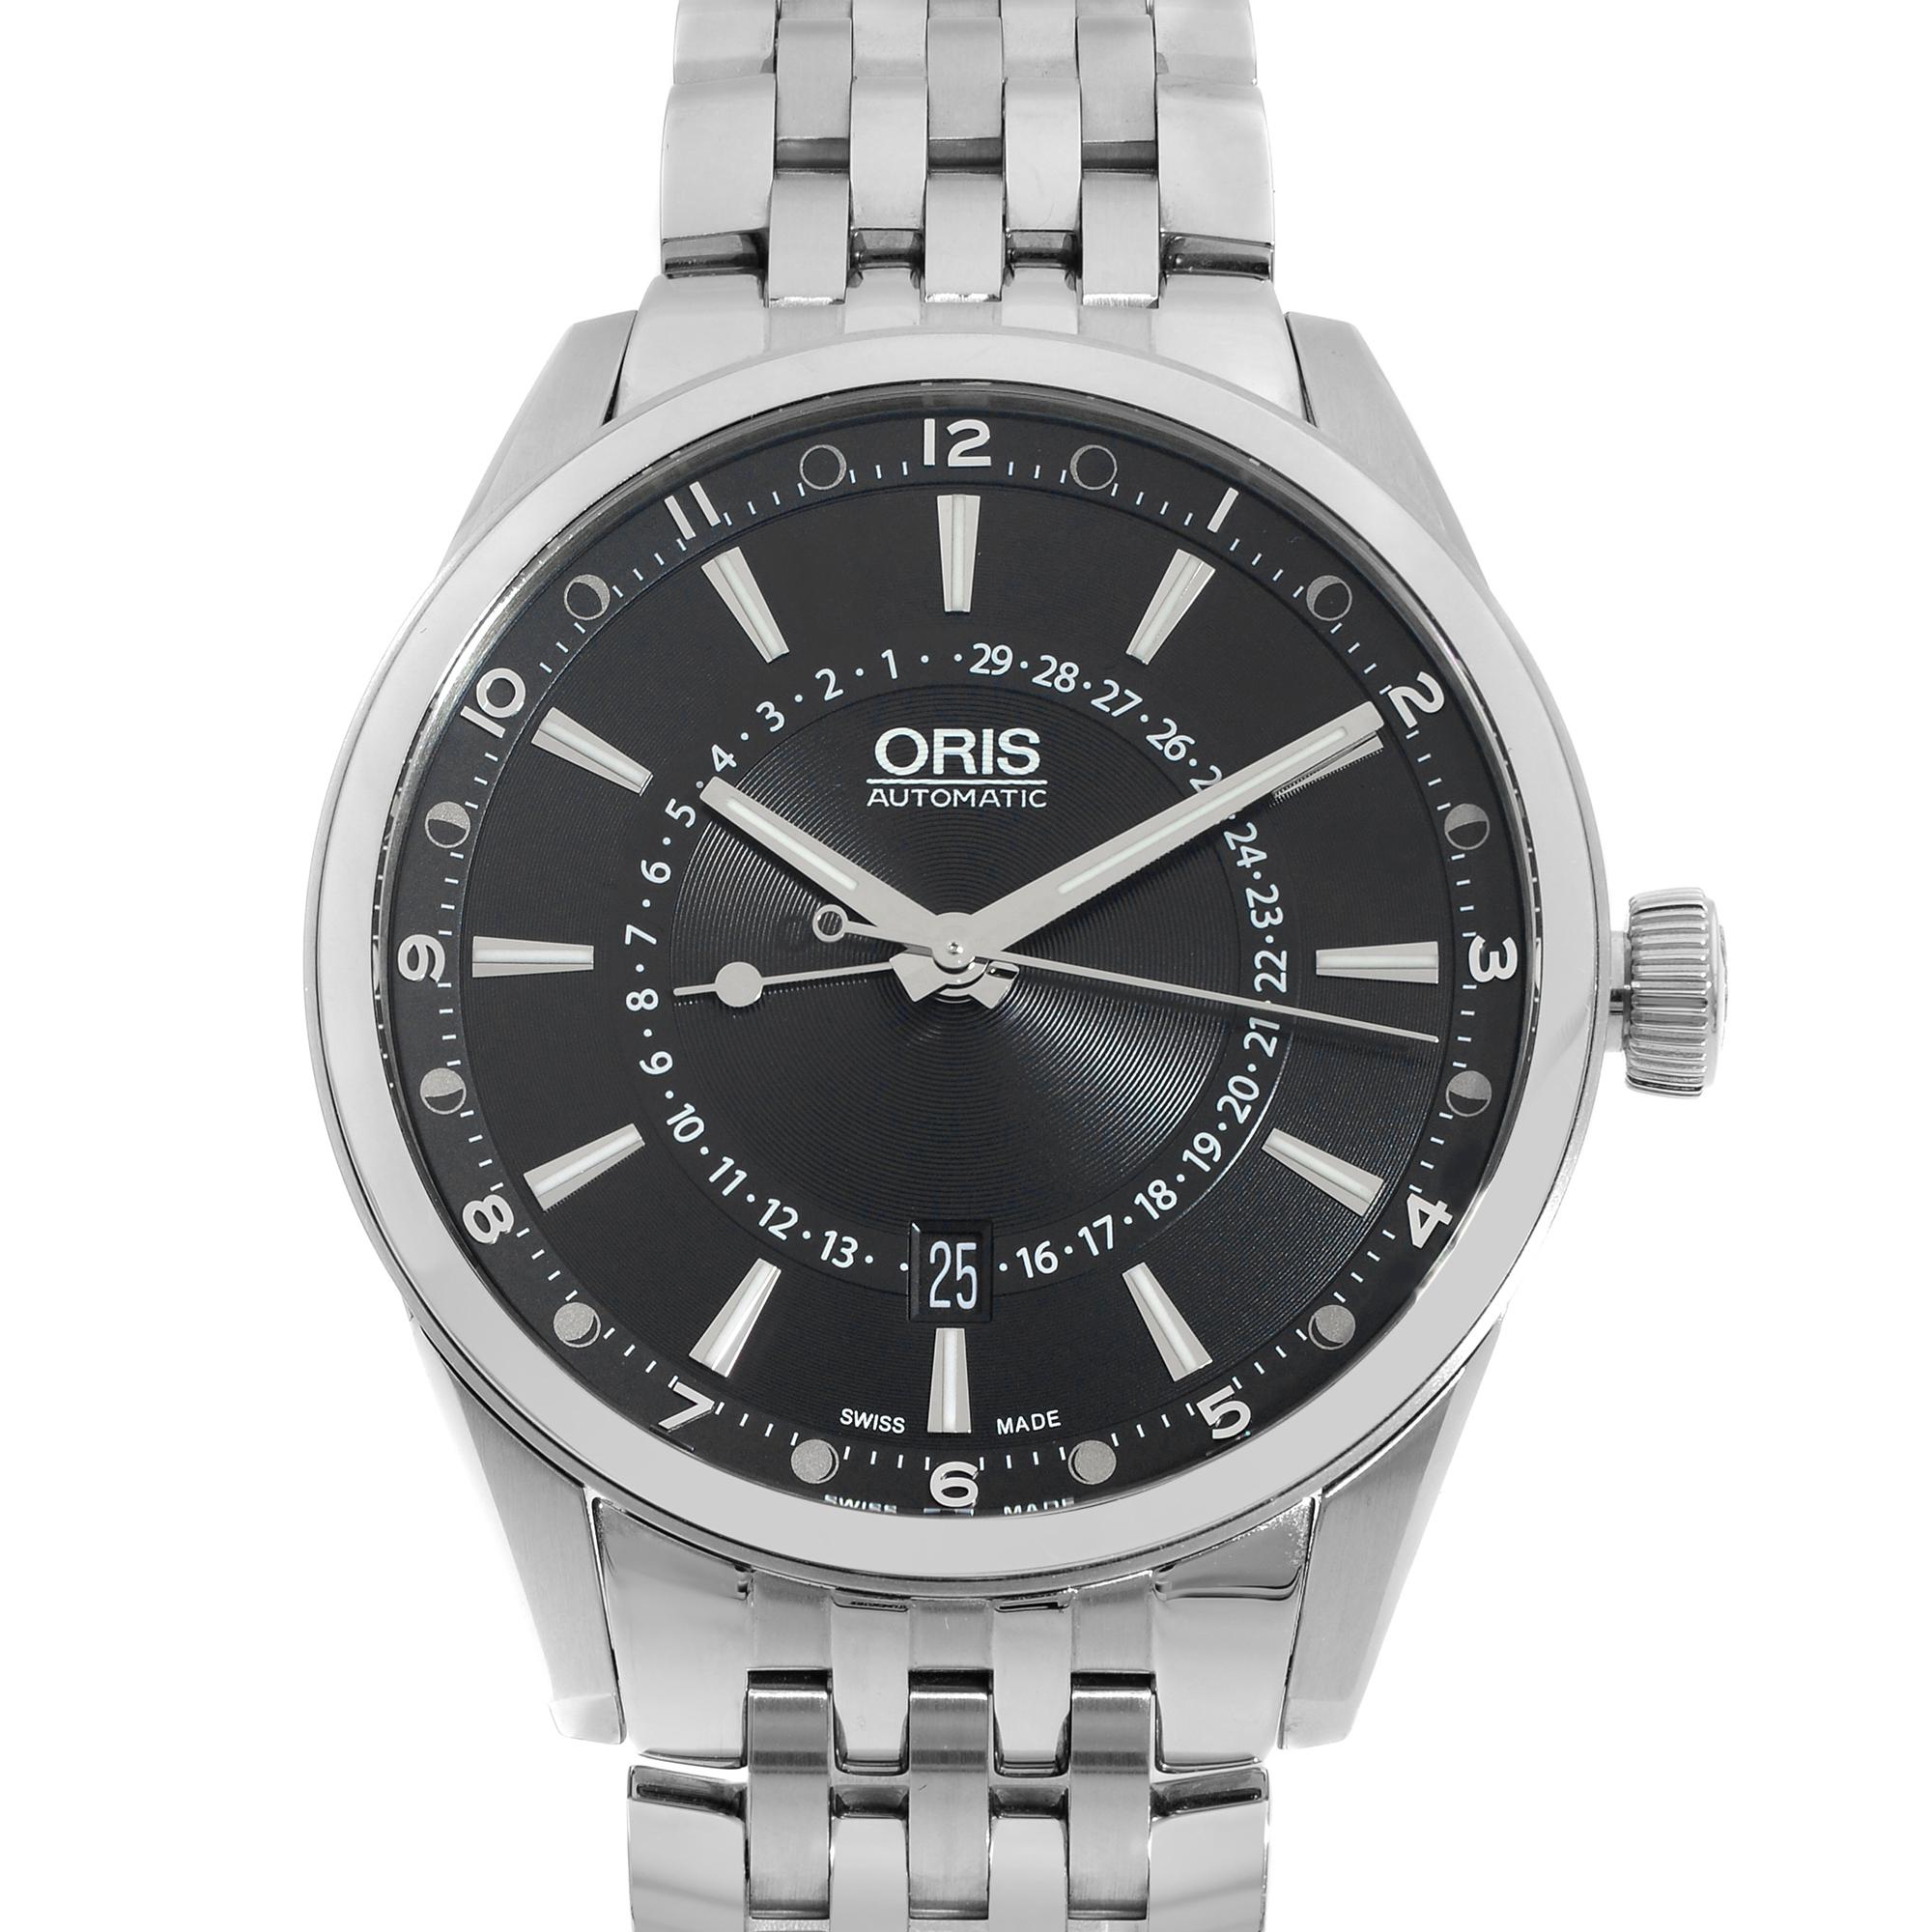 Display model. This watch comes with a Chronostore presentation box and authenticity card.

Details:
Brand Oris
Department Men
Model Number 01 761 7691 4054-07 8 21 80
Country/Region of Manufacture Switzerland
Model Oris Artix
Style